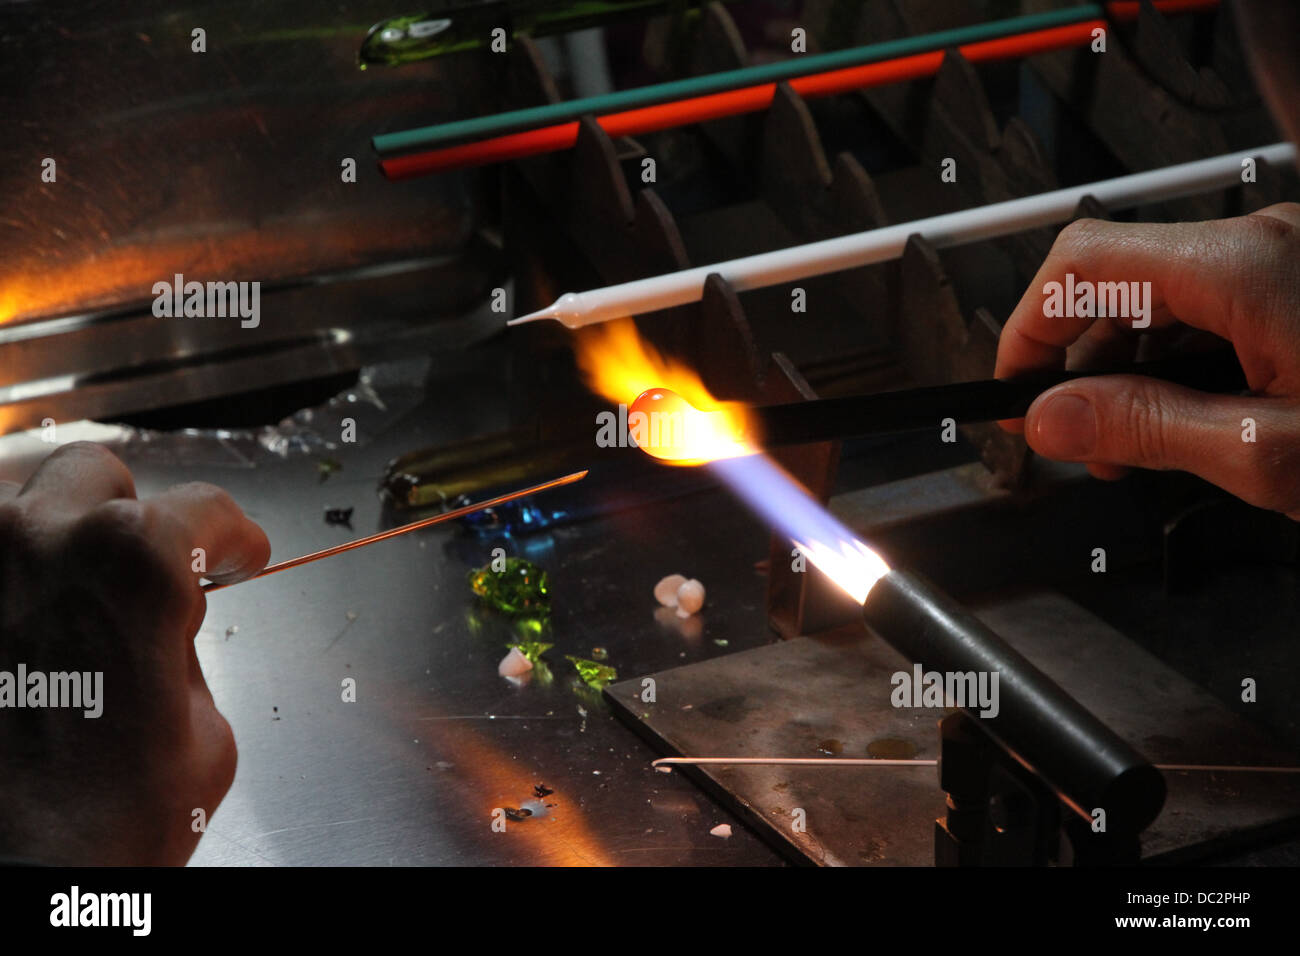 Glazier with gas torch lit while blending and shaping a piece of glass 4 Stock Photo